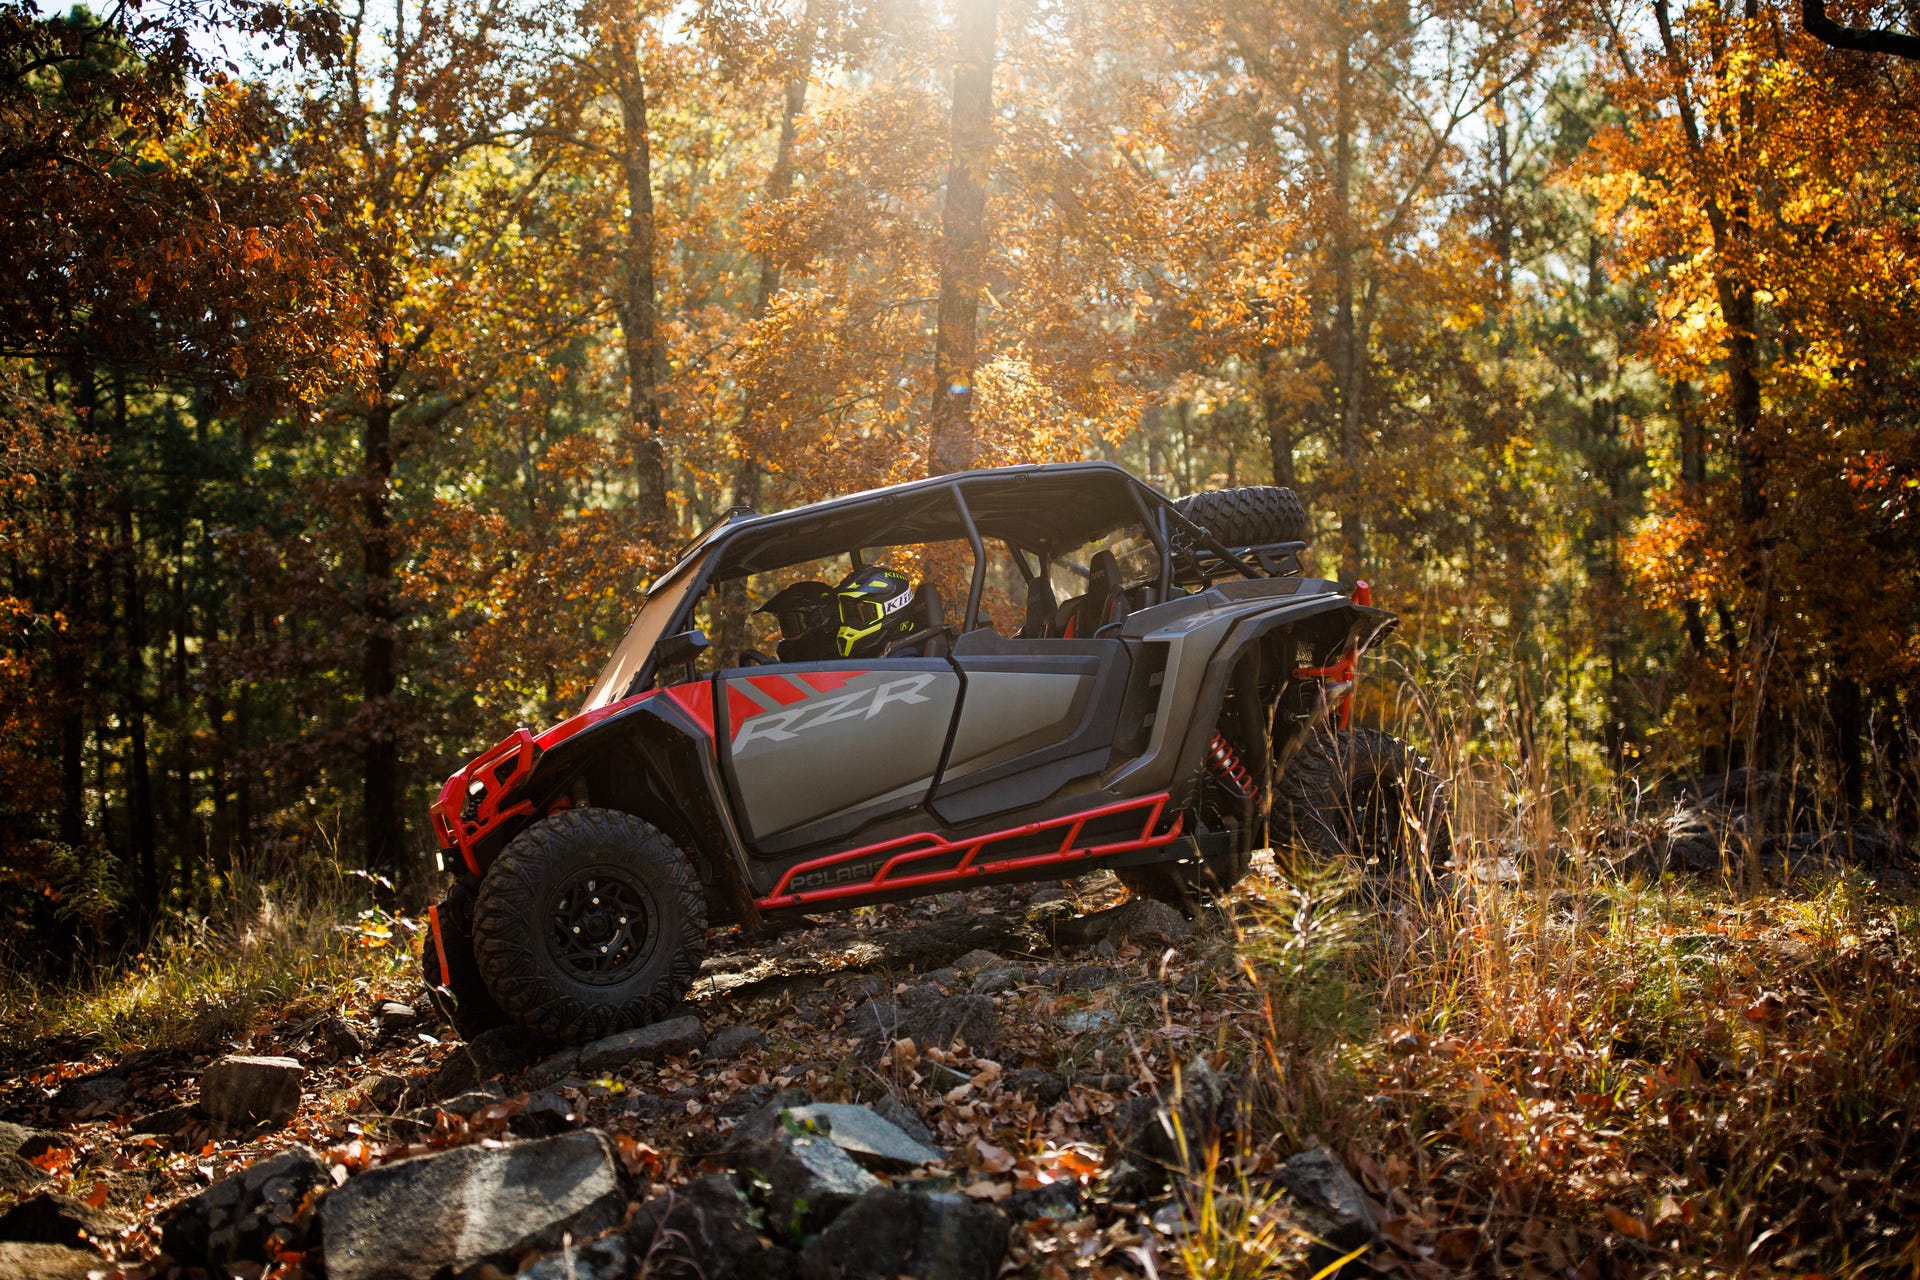 Into the Woods with the All-New Polaris RZR XP